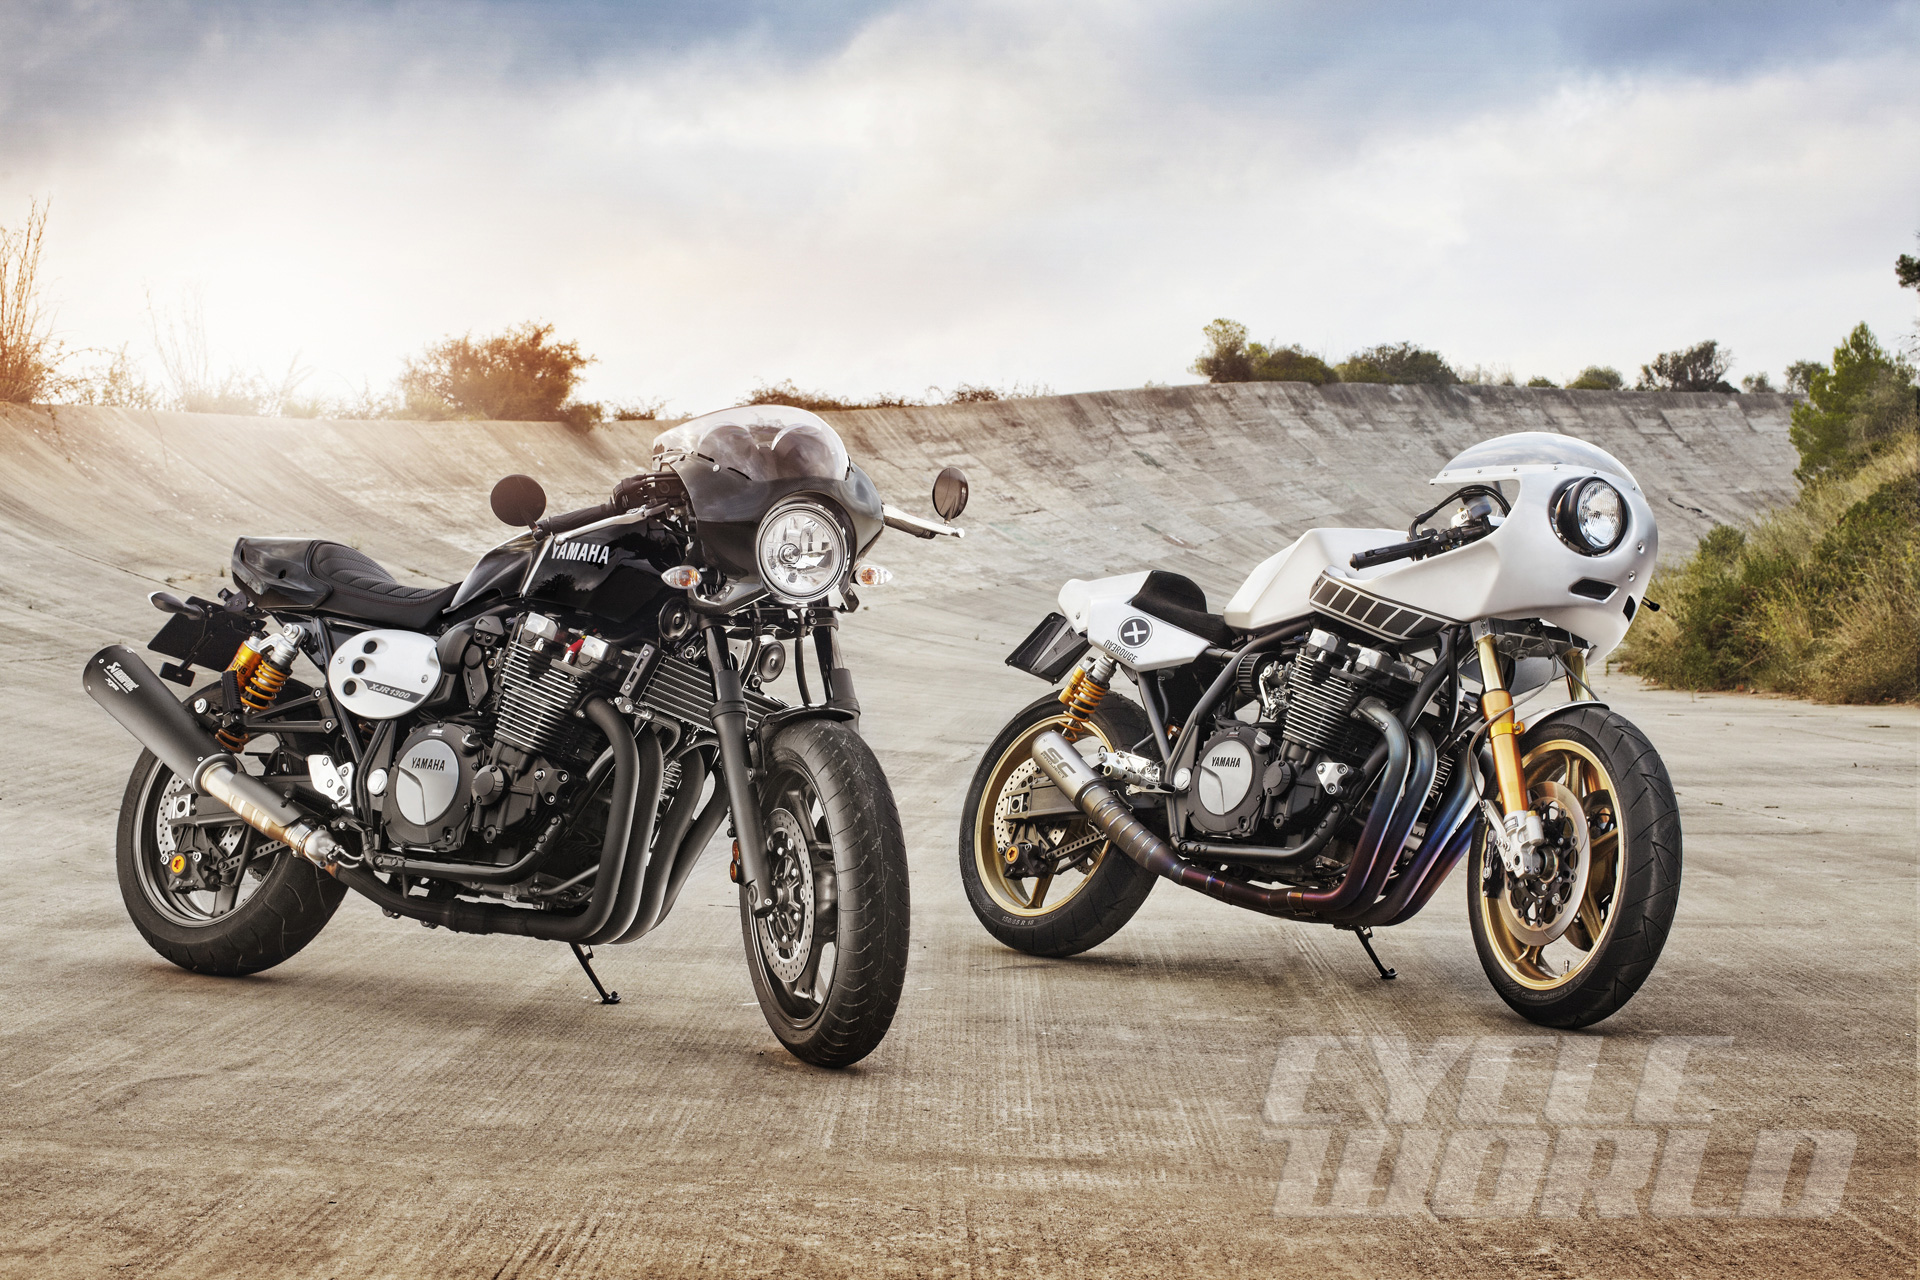 New 2015 Yamaha XJR1300 and MT-07 Moto Cage Revealed at INTERMOT 2014 |  Cycle World